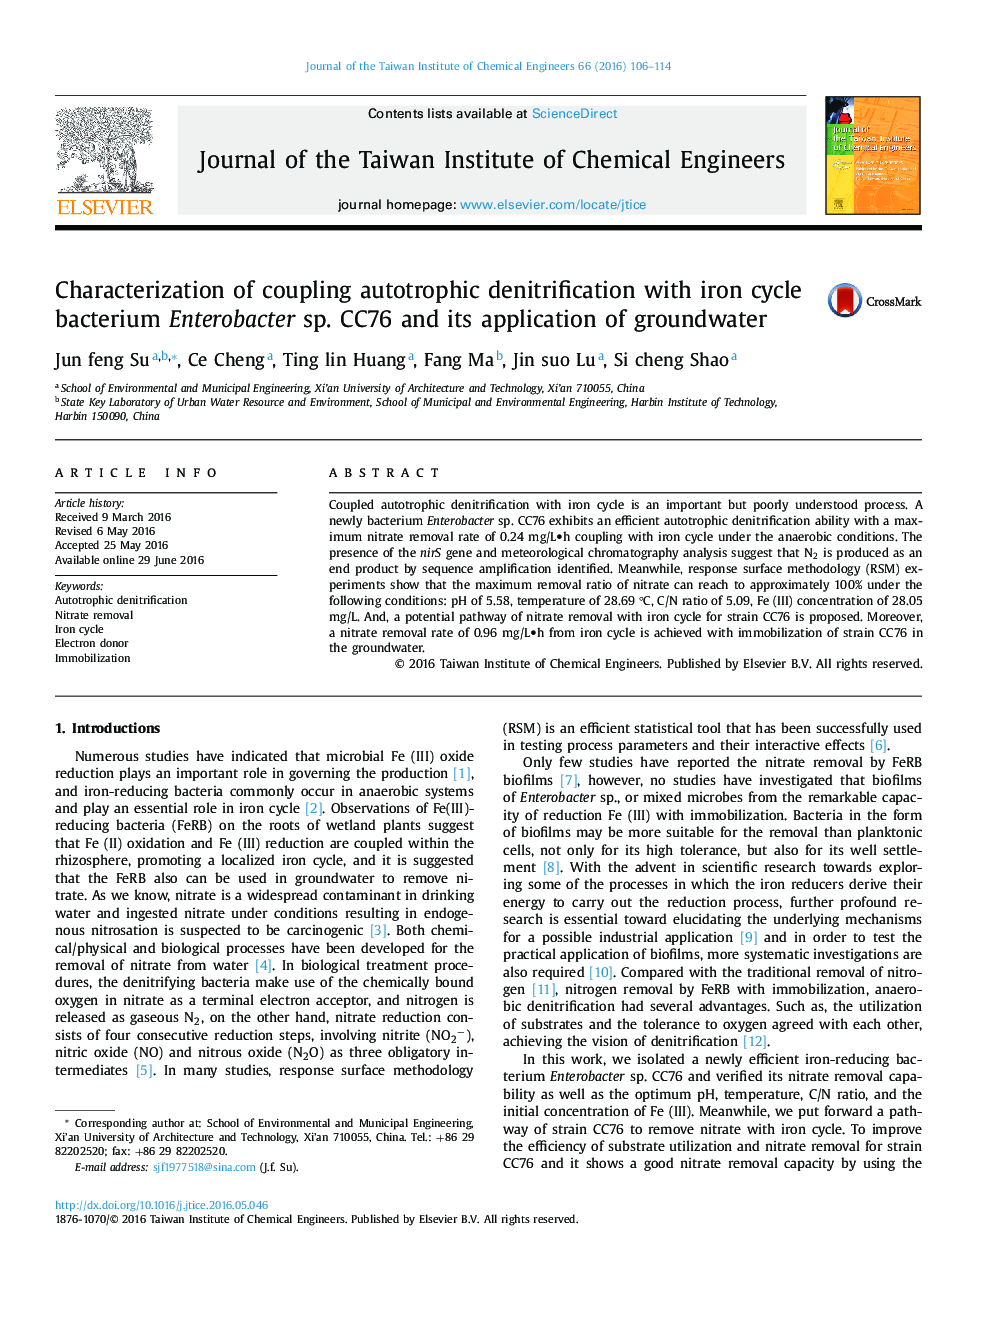 Characterization of coupling autotrophic denitrification with iron cycle bacterium Enterobacter sp. CC76 and its application of groundwater